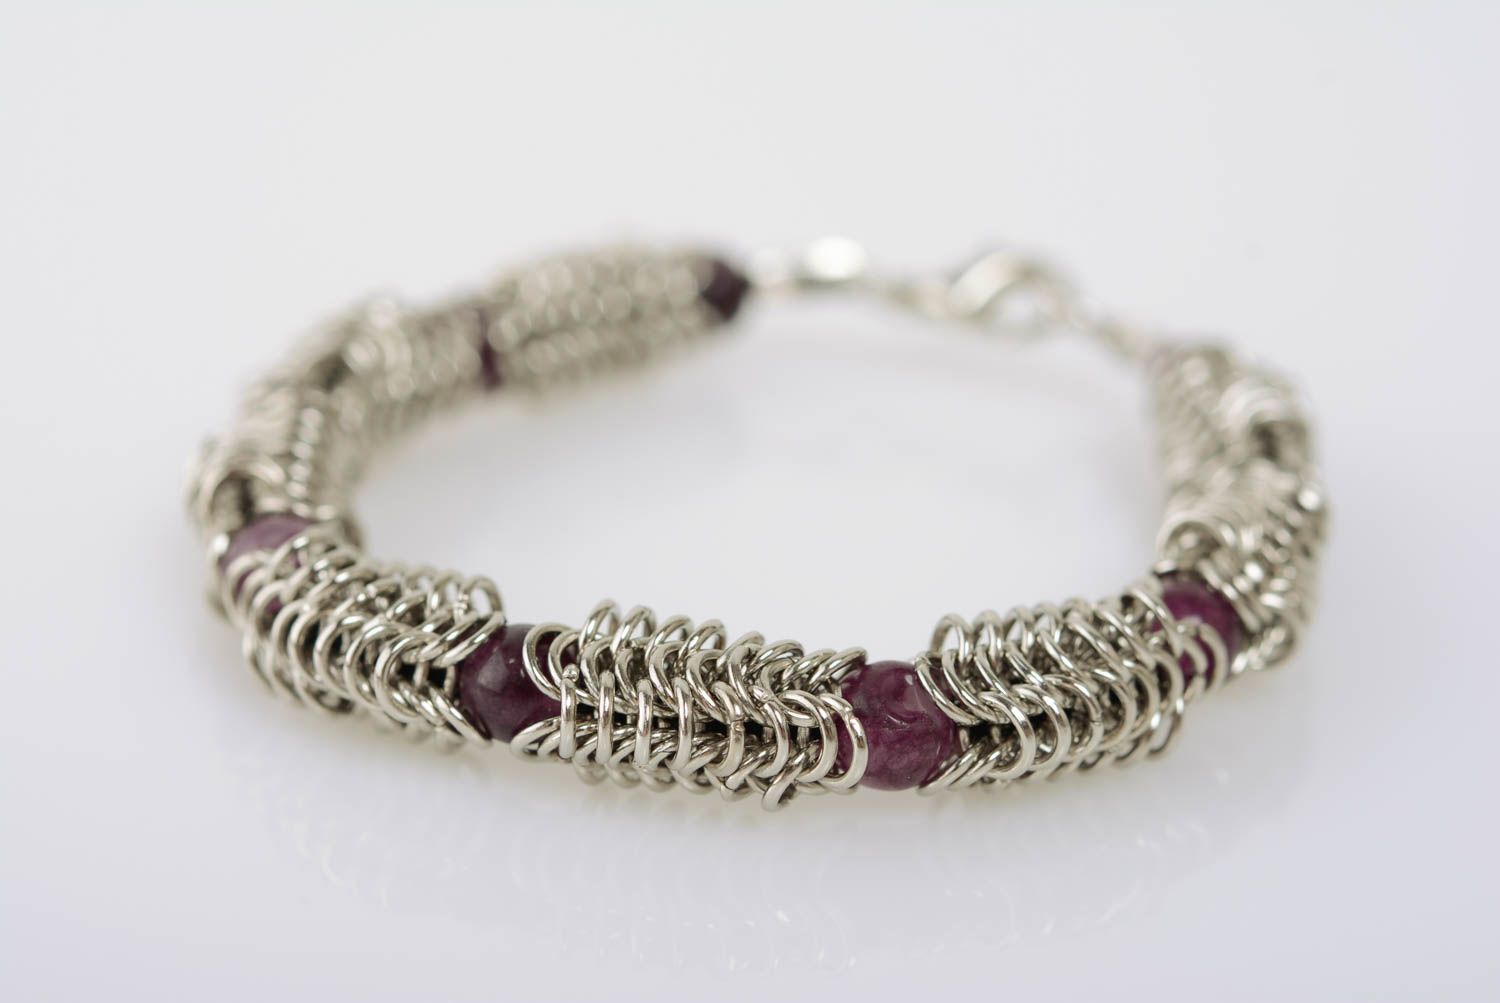 Handmade jewelry alloy bracelet chain mail weaving technique with amethyst photo 1